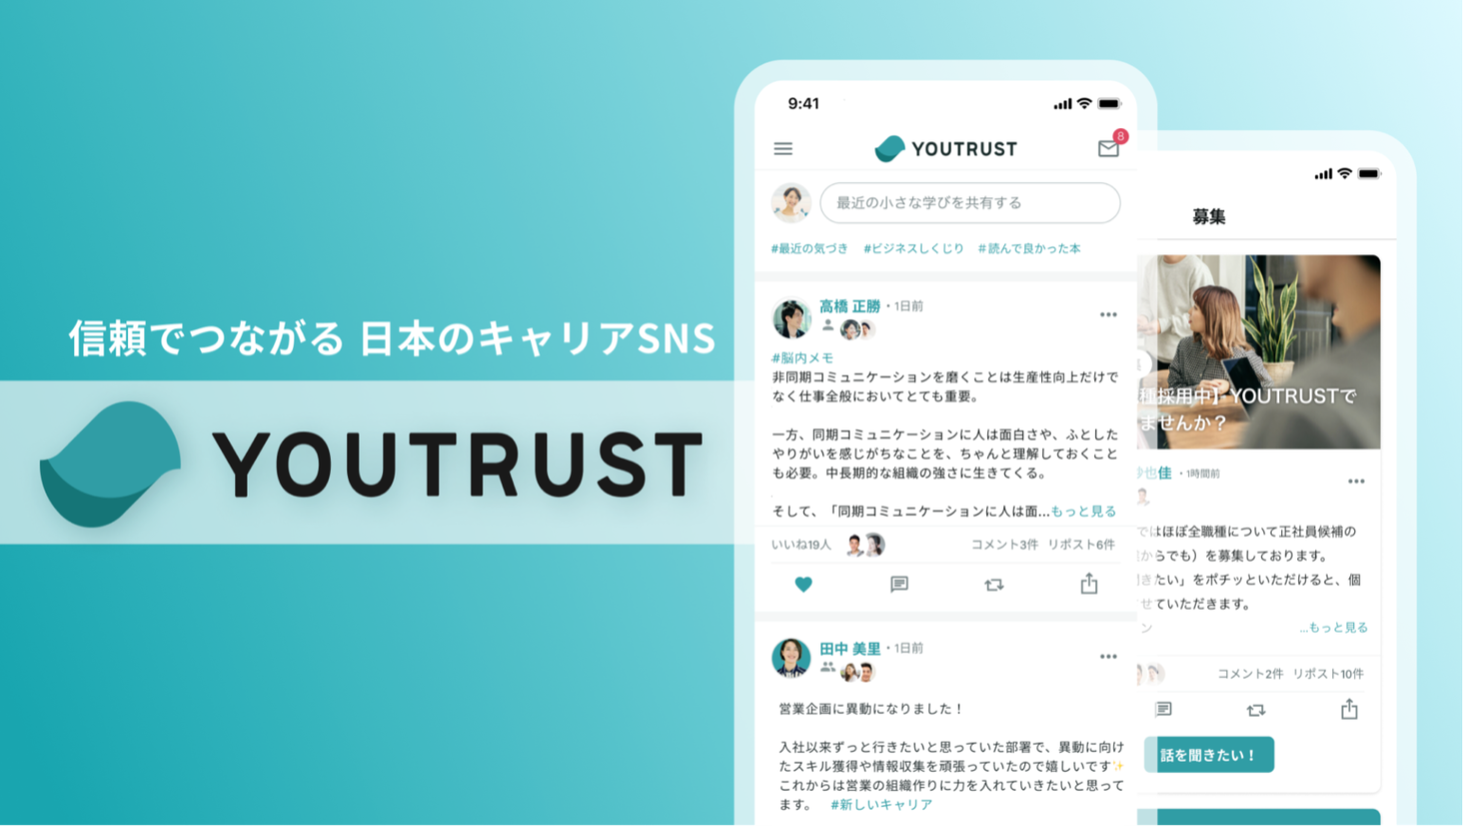 Lead investment in YOUTRUST, a Japanese career social networking service.